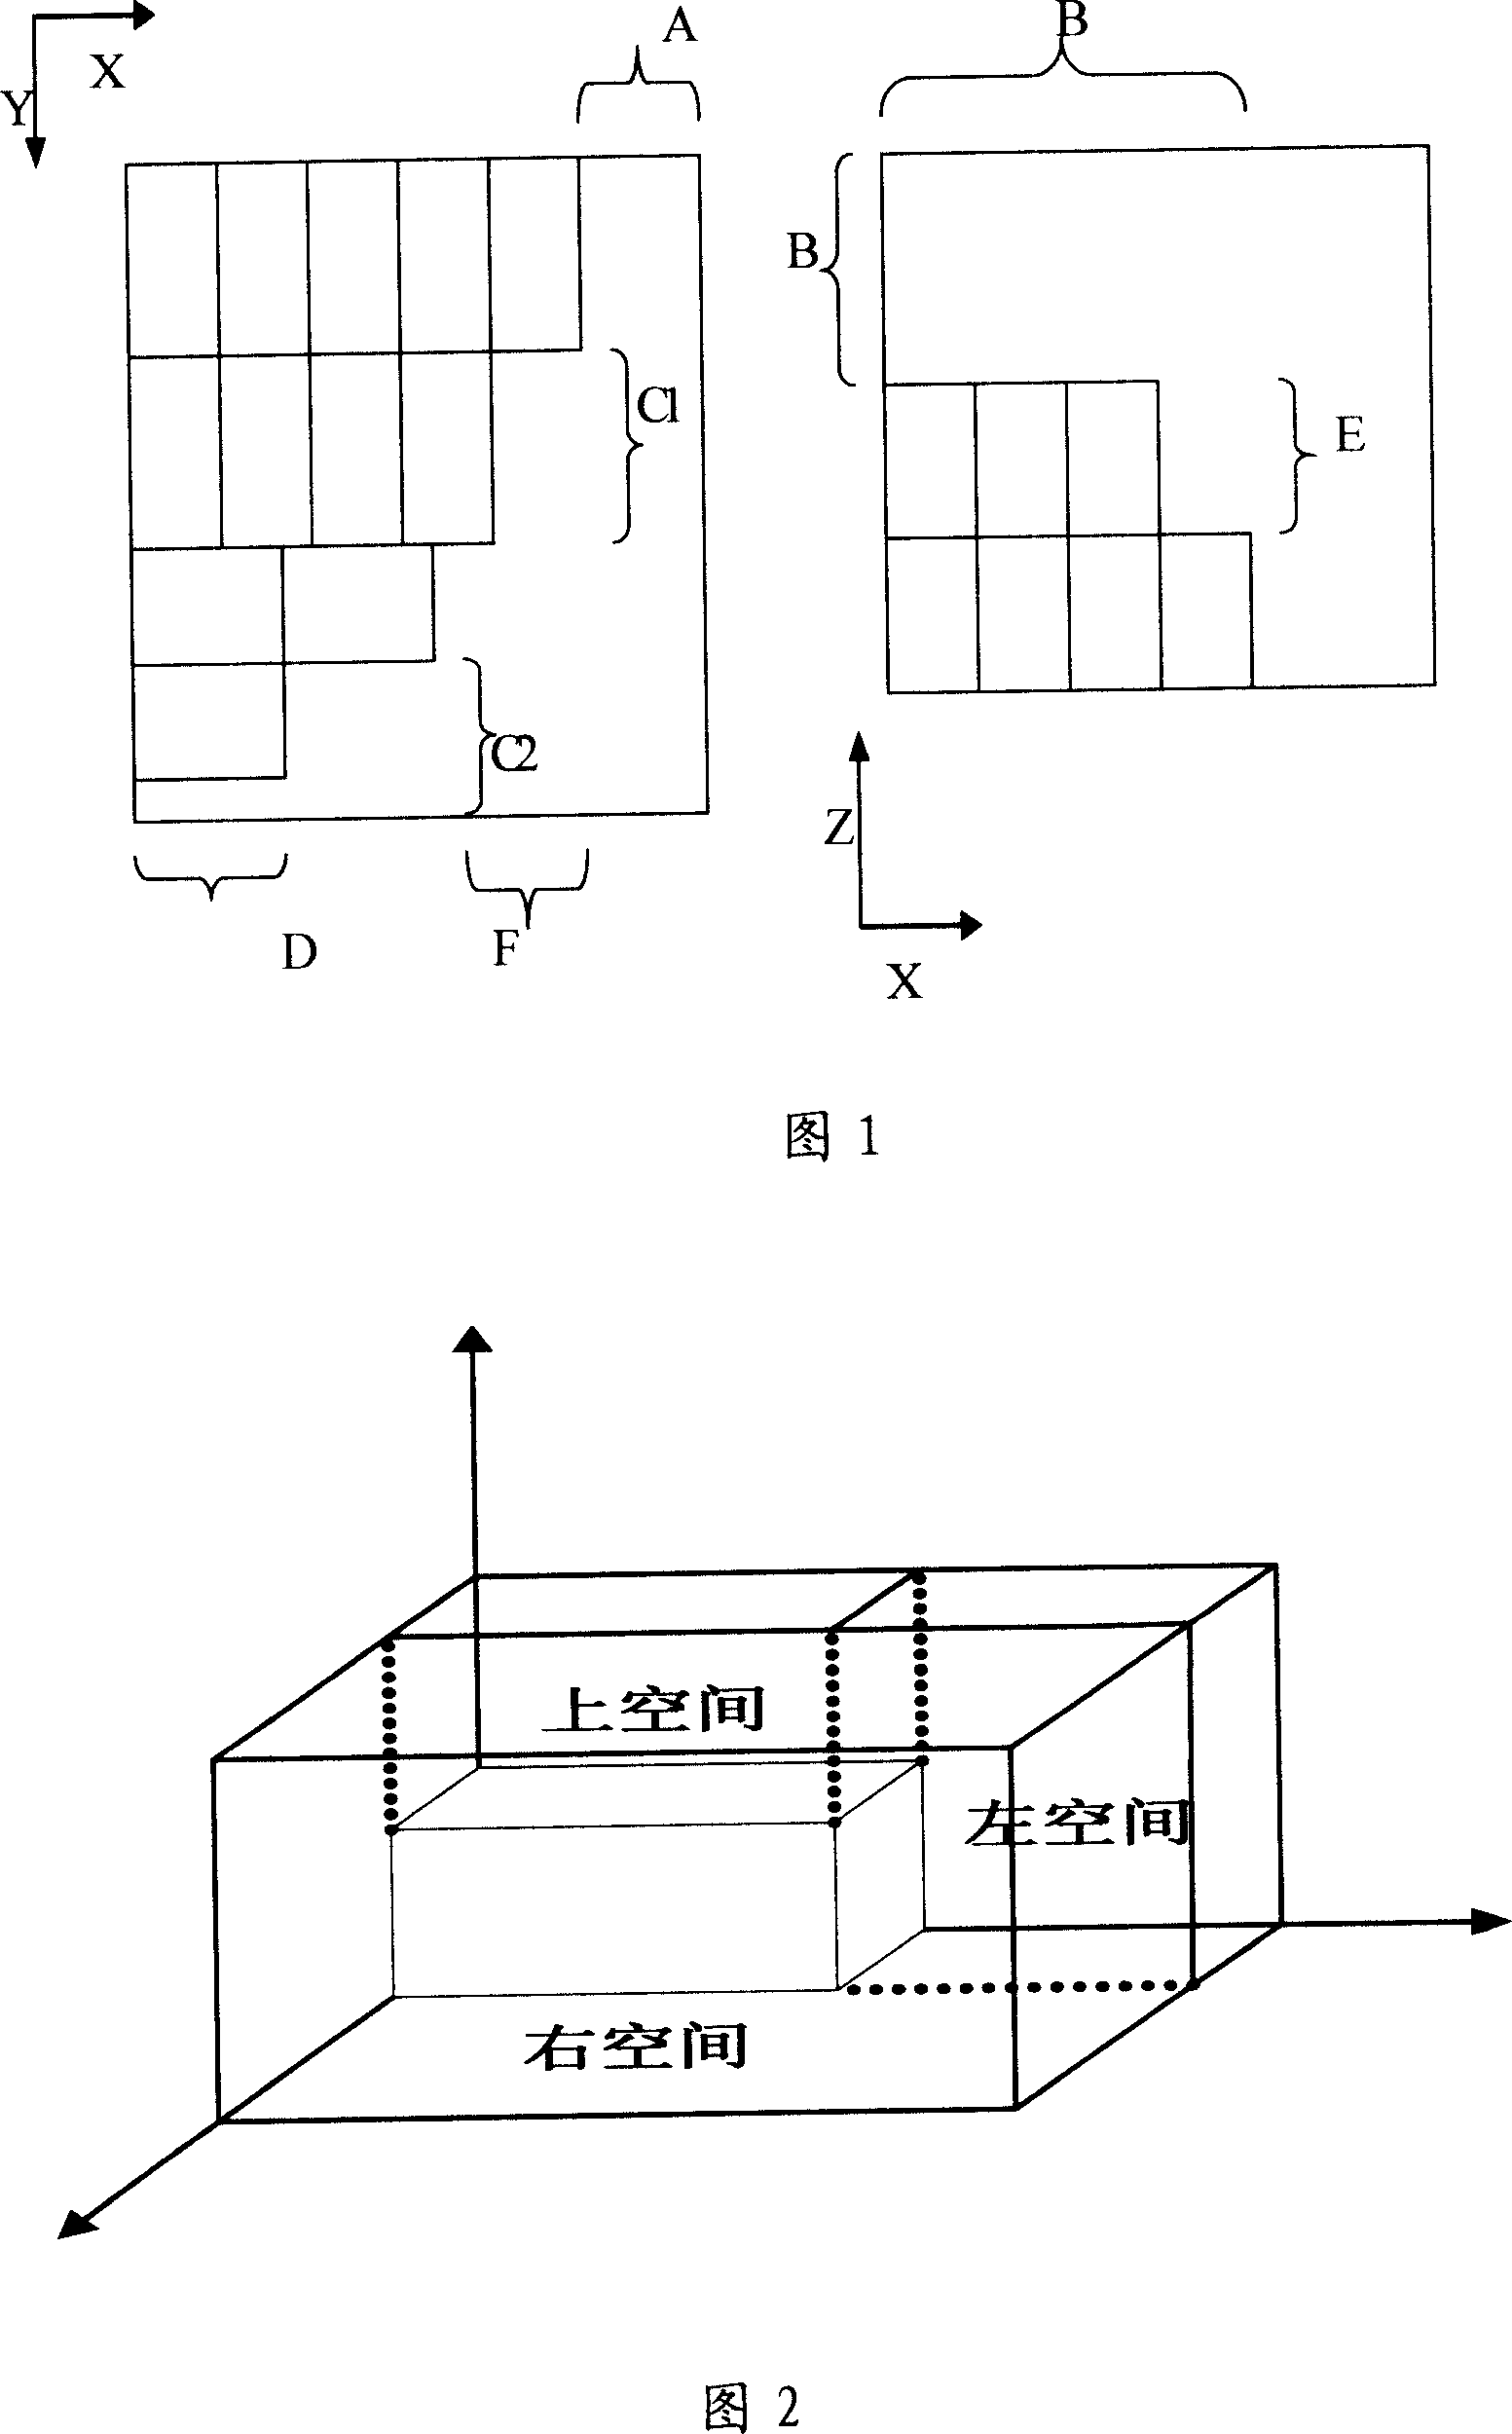 Heuristic car-distribution method under multiple constraint conditions